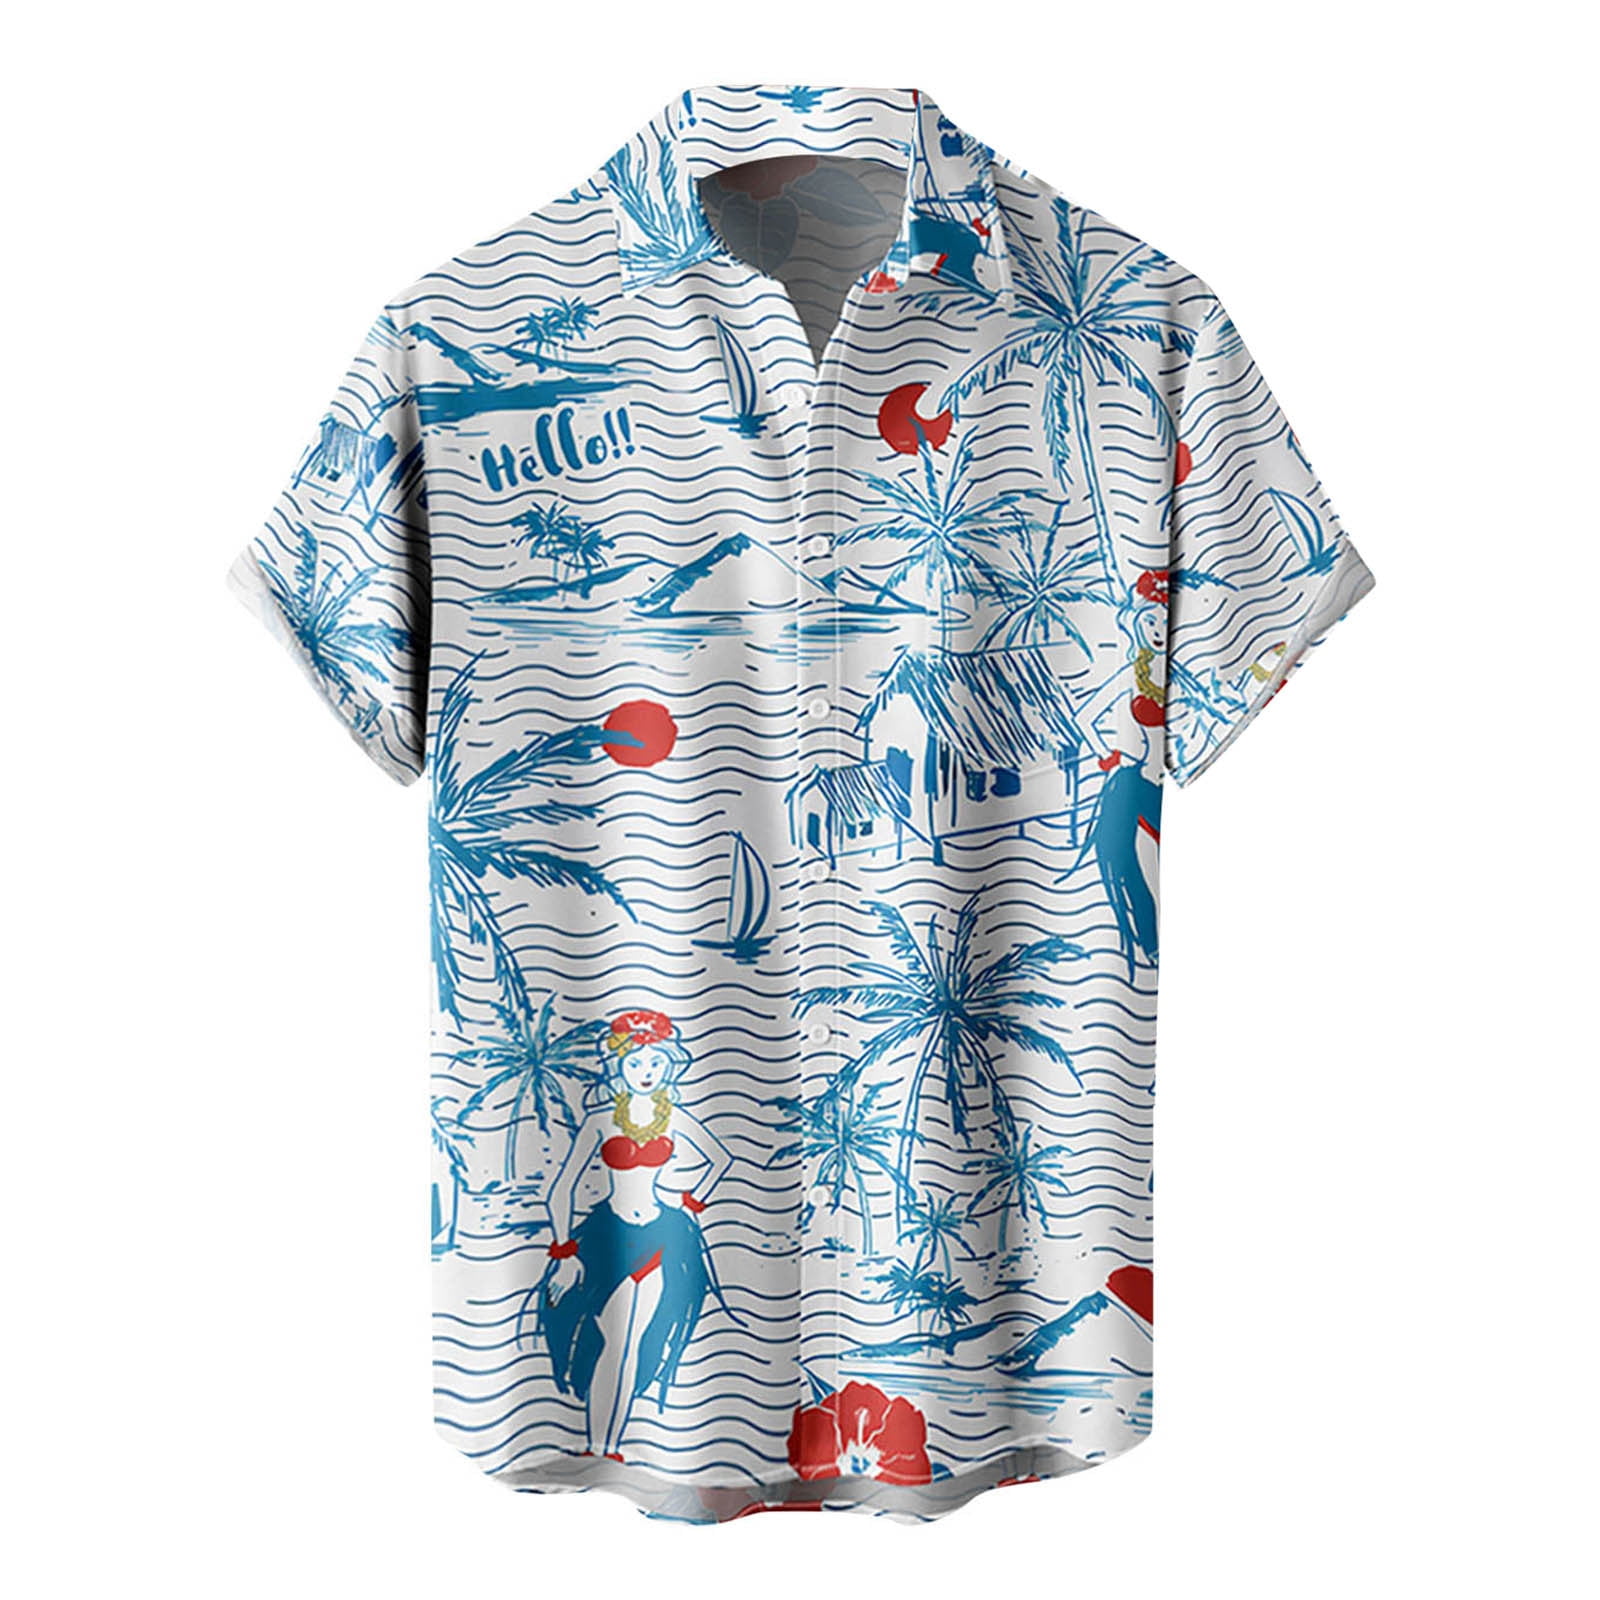 YEAR IN YEAR OUT Mens Hawaiian Shirt Regular Fit Hawaiian Shirts for Men with Quick to Dry Effect 